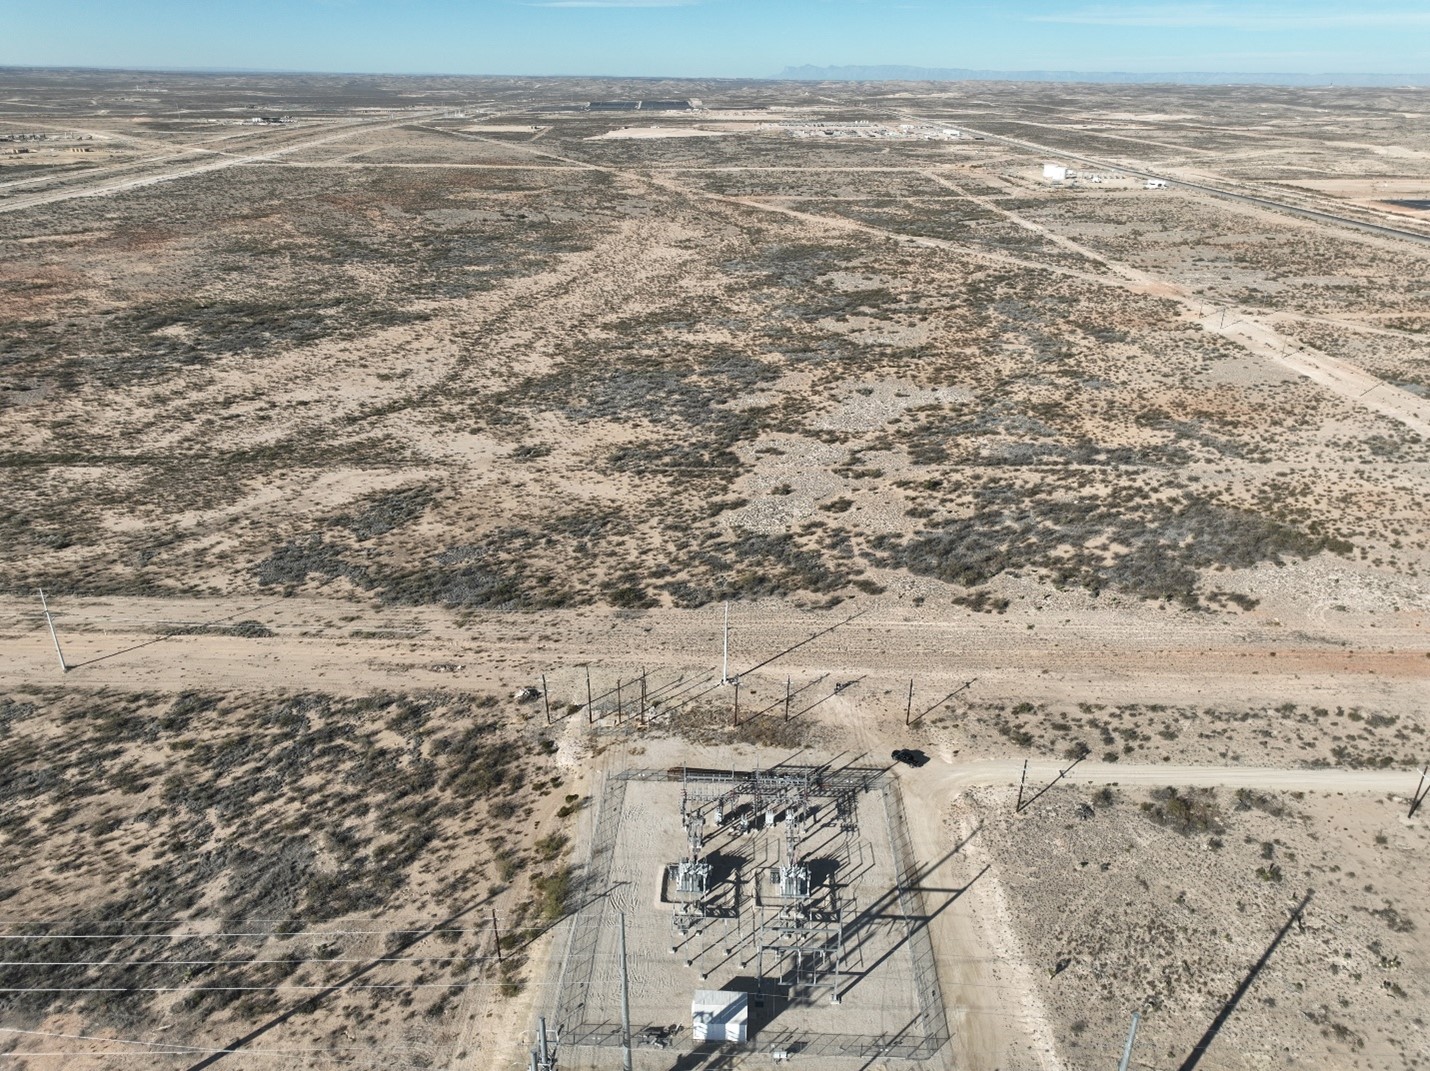 Hut 8 is building a new site in Culberson County, Texas for 40% less than the cost of buying a turnkey site. Expected to come online in Q2, the site is expected to have up to 3.6 EH/s of self-mining capacity.